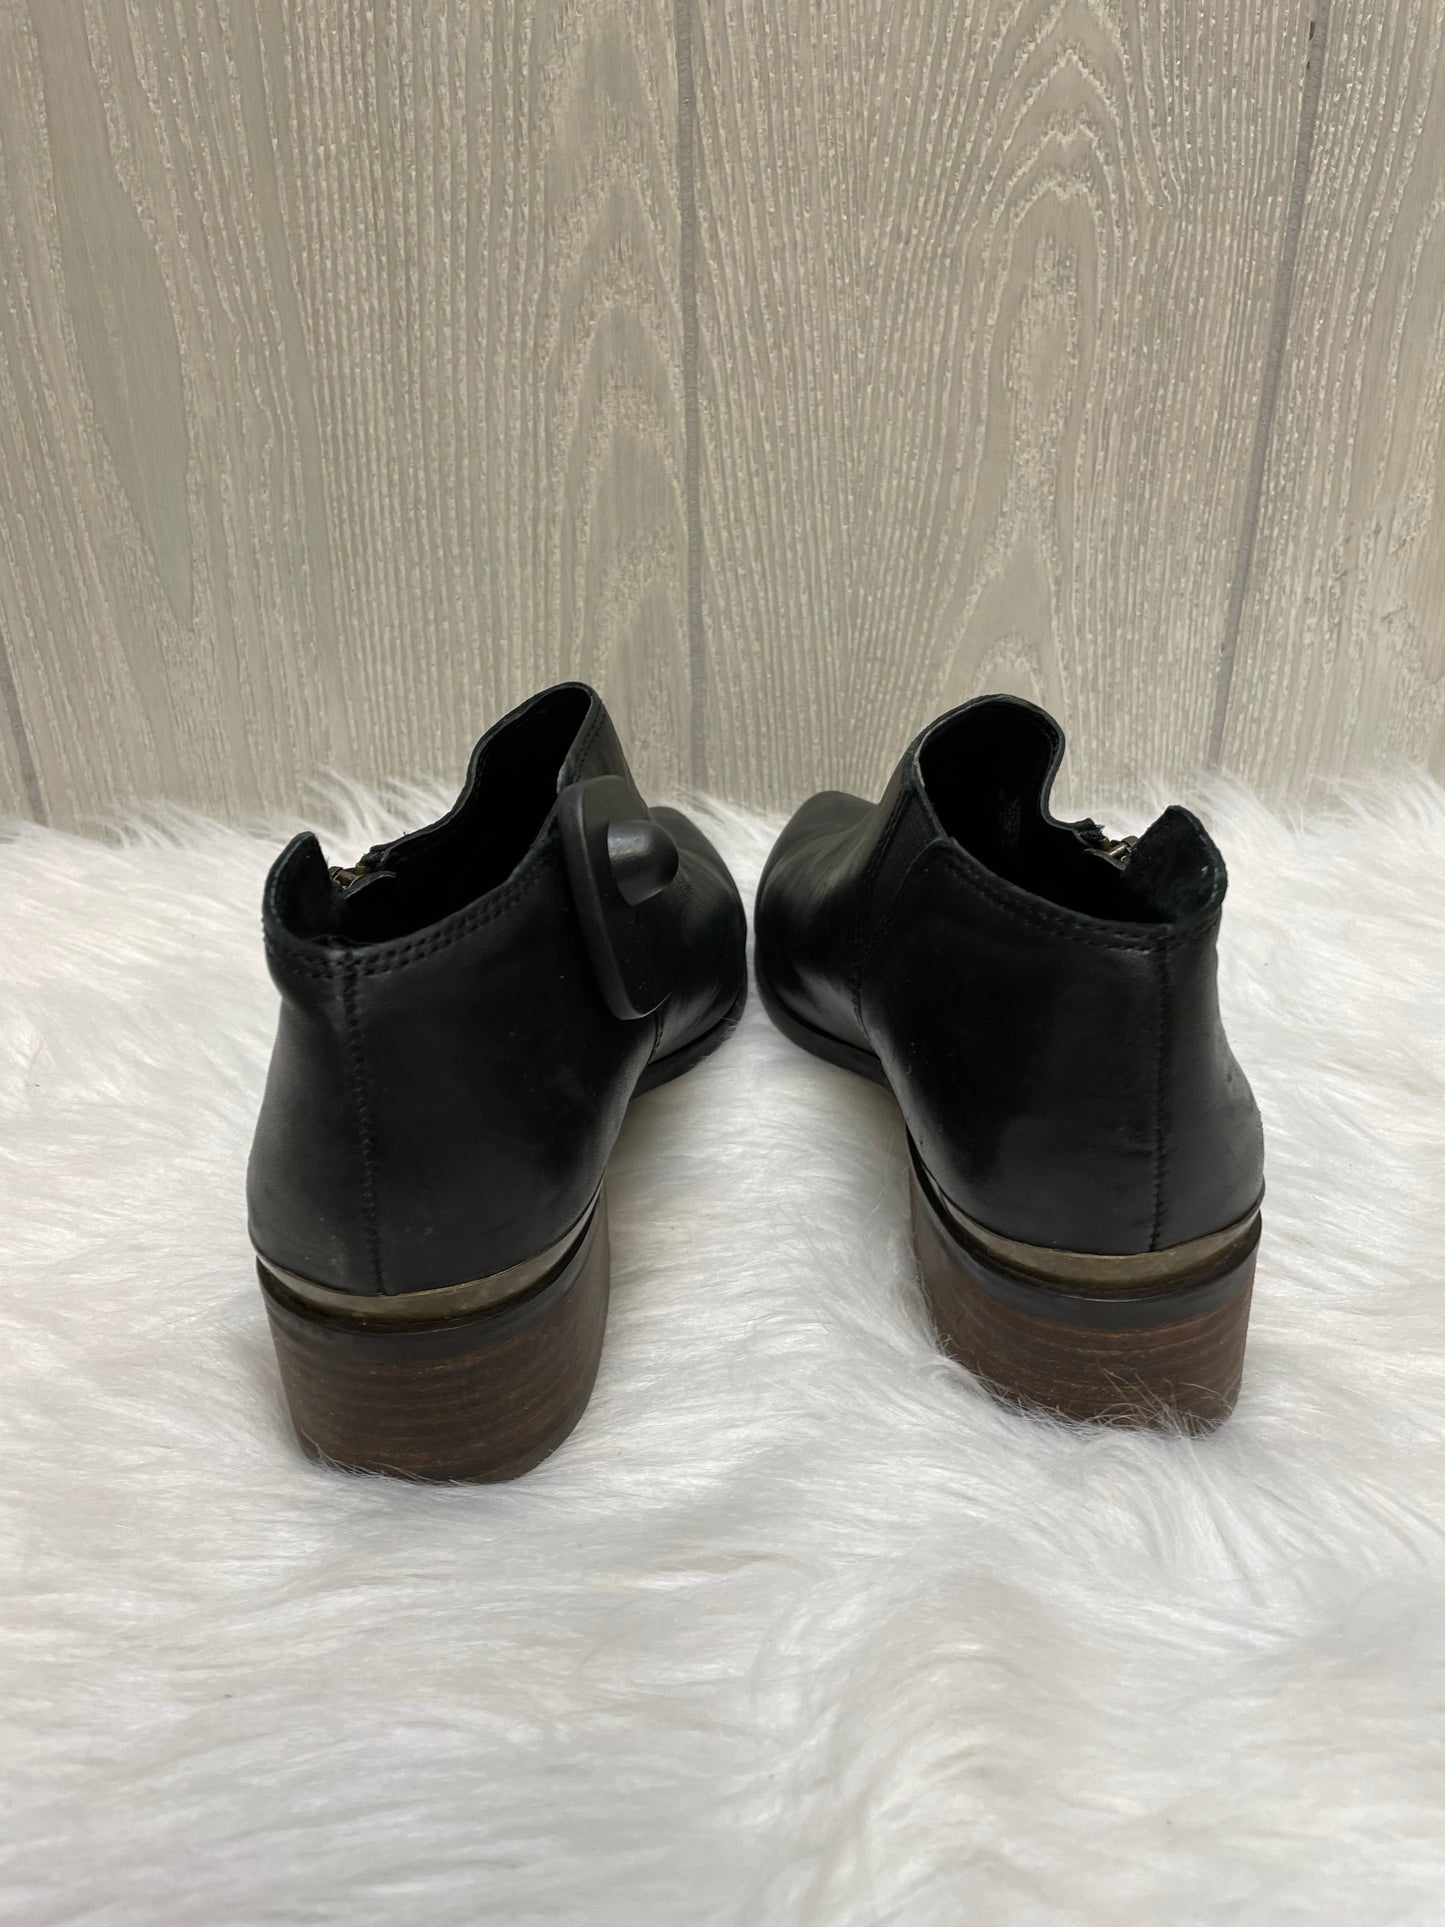 Black & Brown Boots Ankle Heels Lucky Brand, Size 8.5